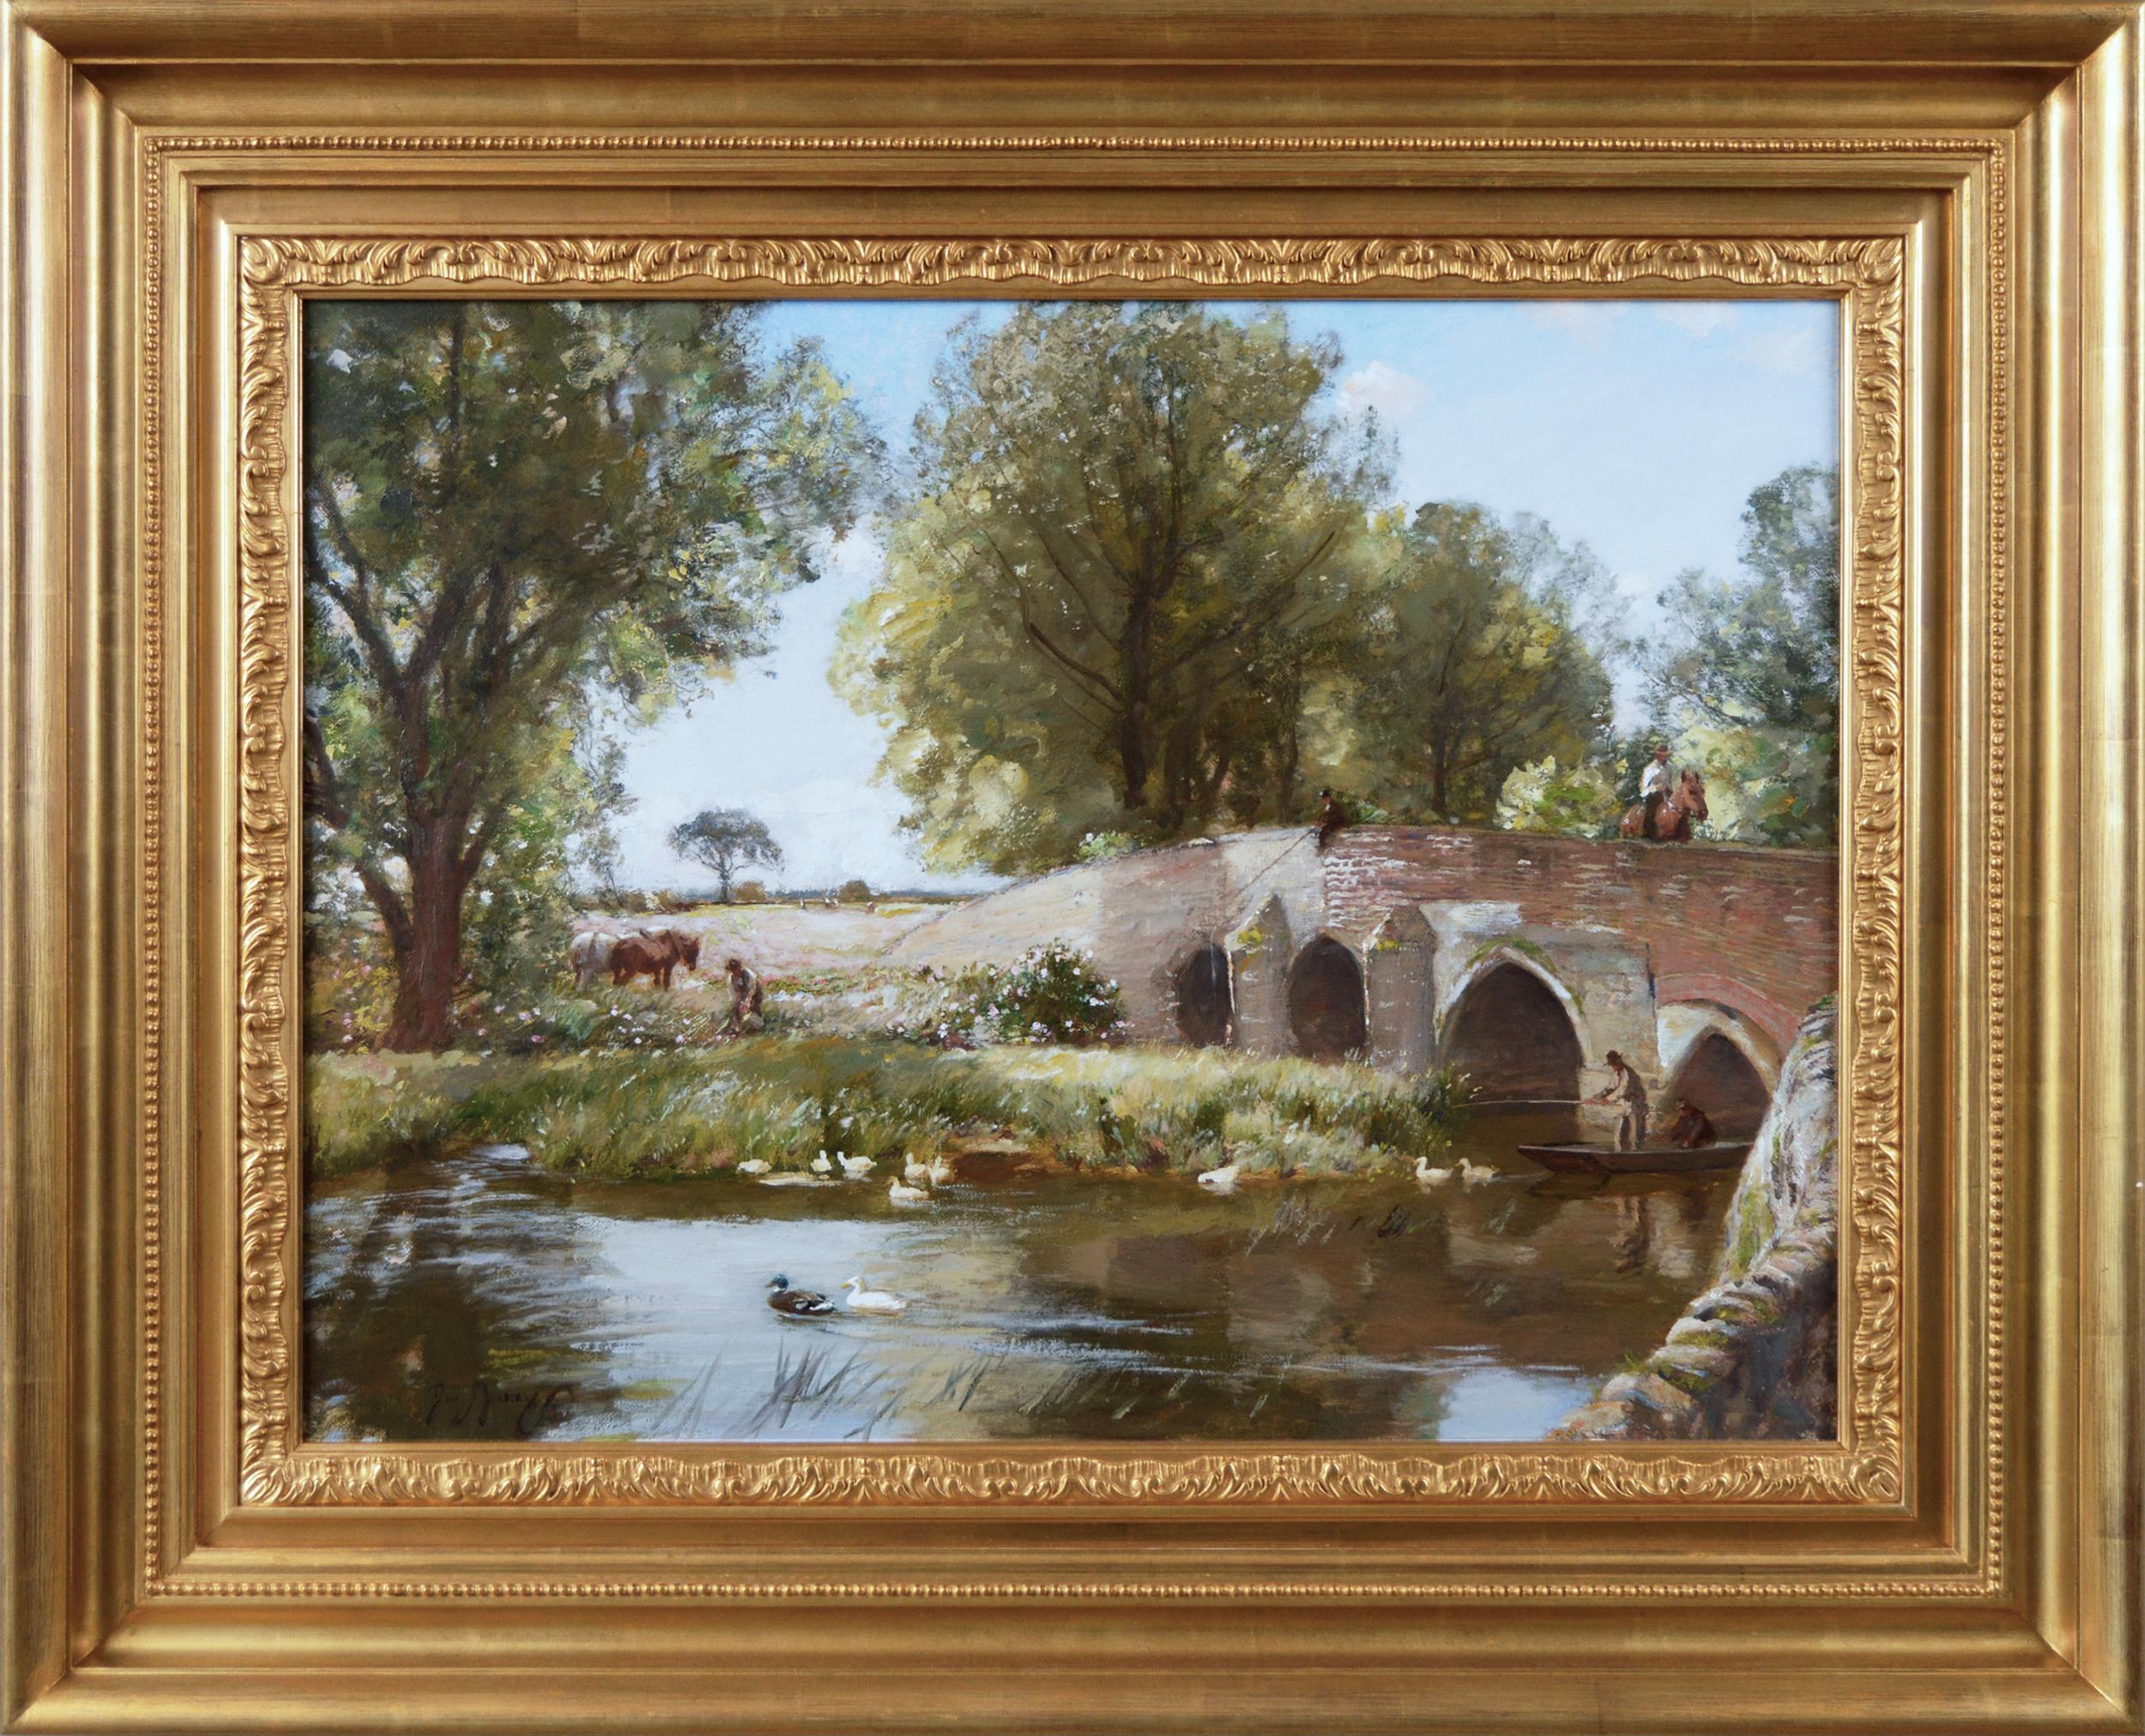 Sir David Murray Landscape Painting - 19th Century landscape oil painting of a bridge over a river